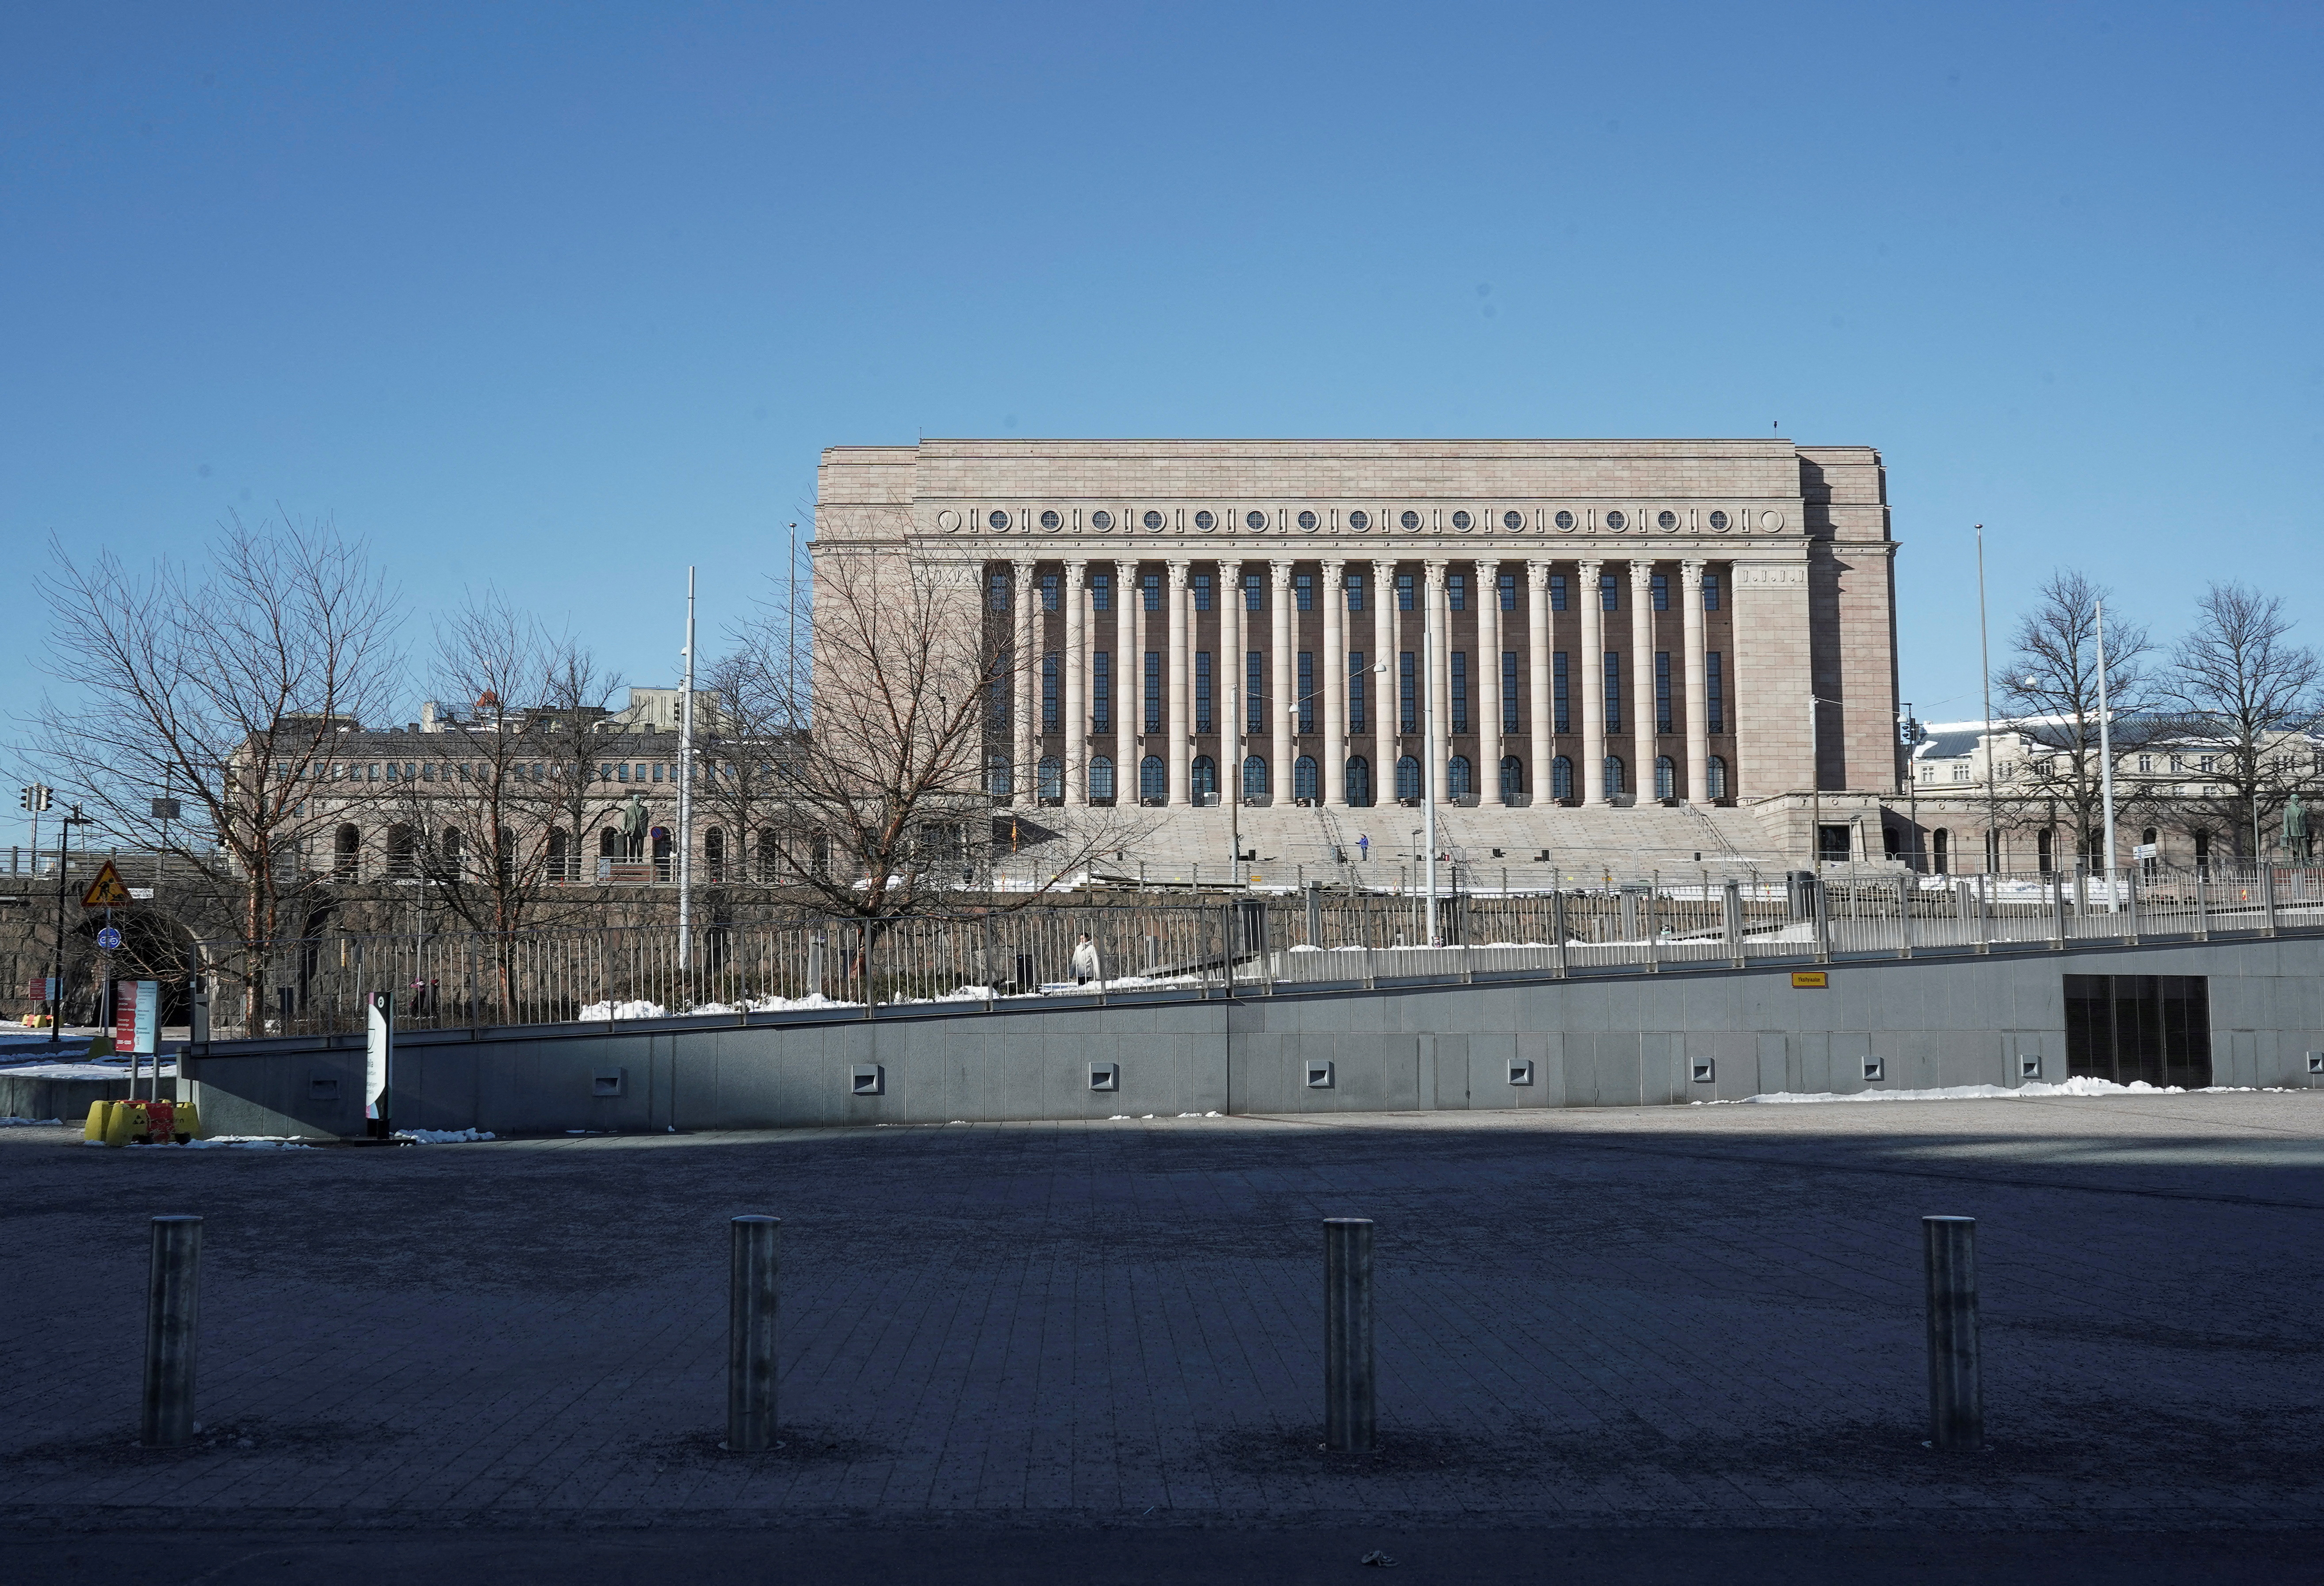 A general view of the Parliament House in Helsinki